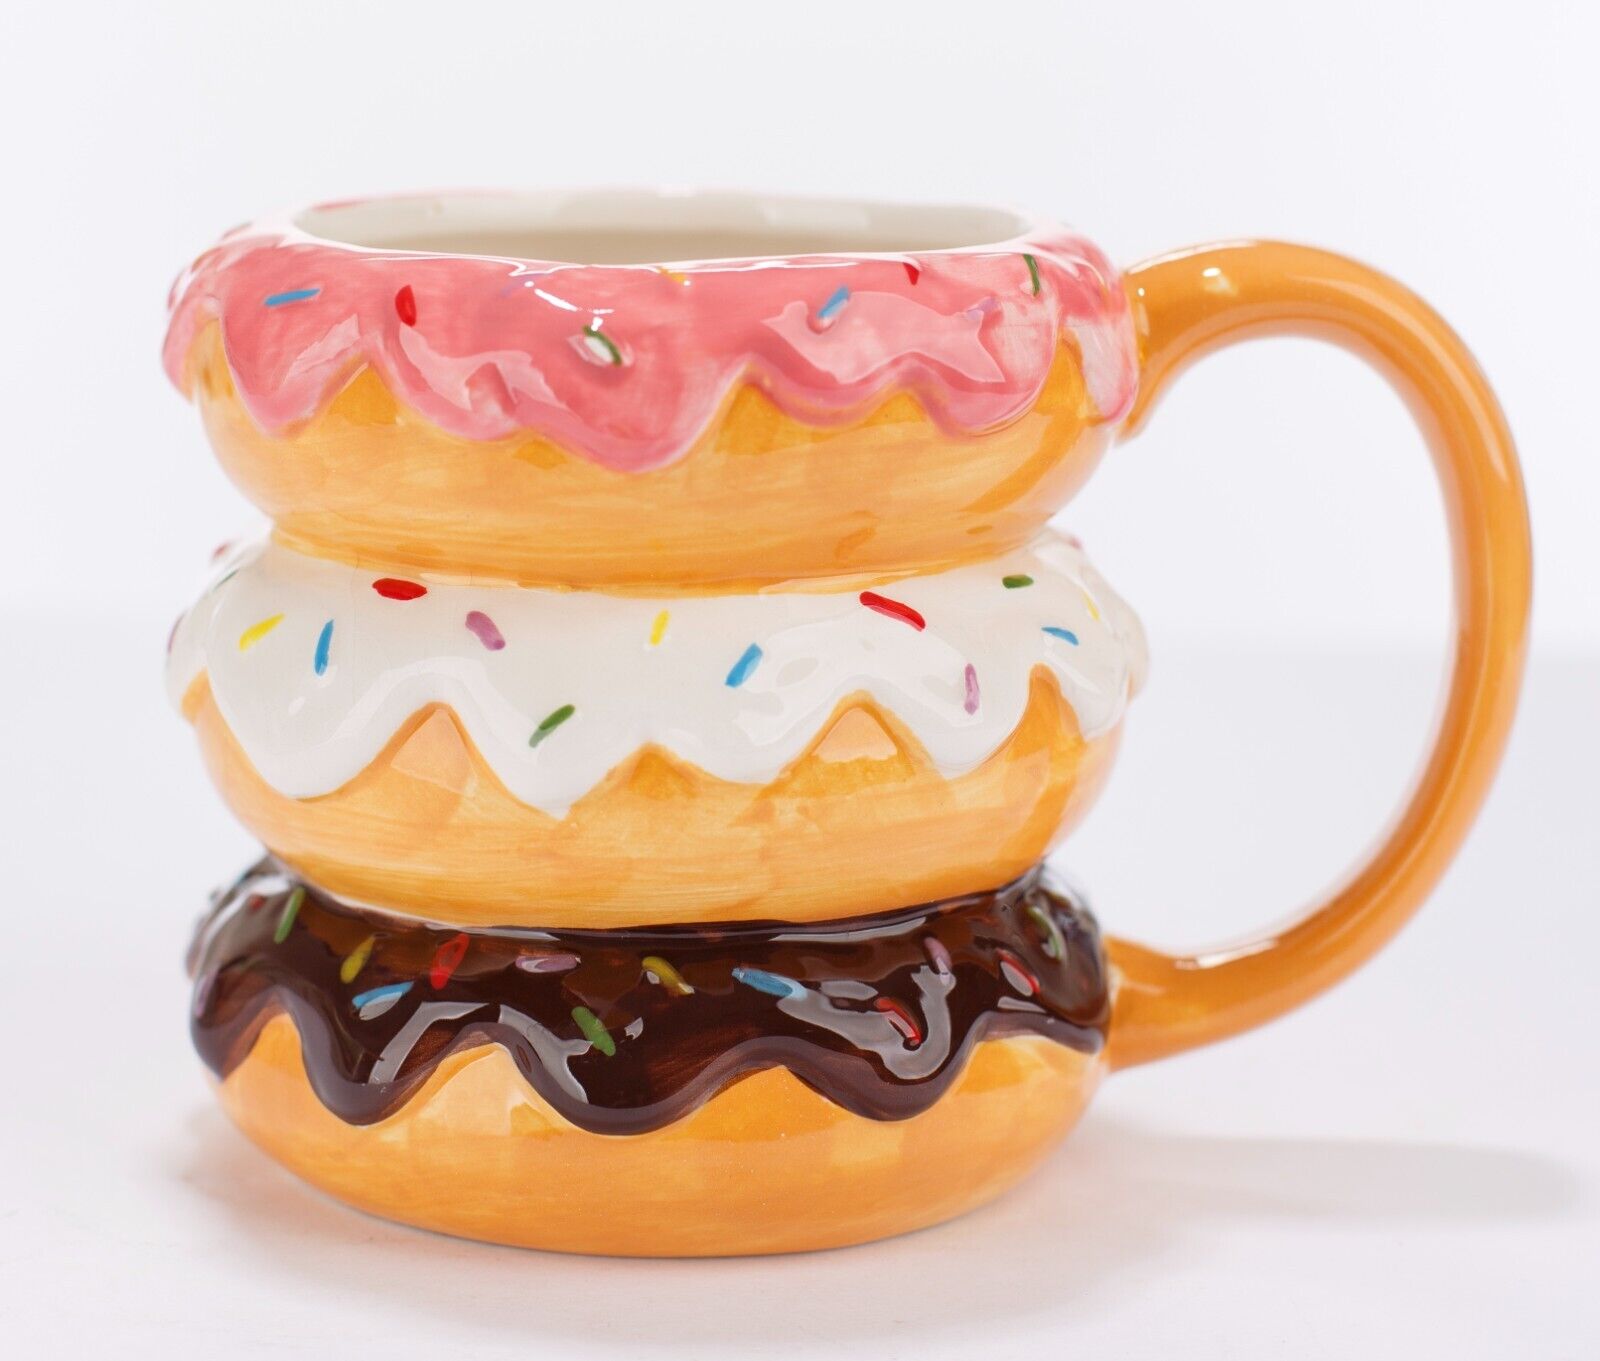 Stacked Sprinkled Donuts Coffee Mug Tea Cocoa Cup by Room Essentials Gift